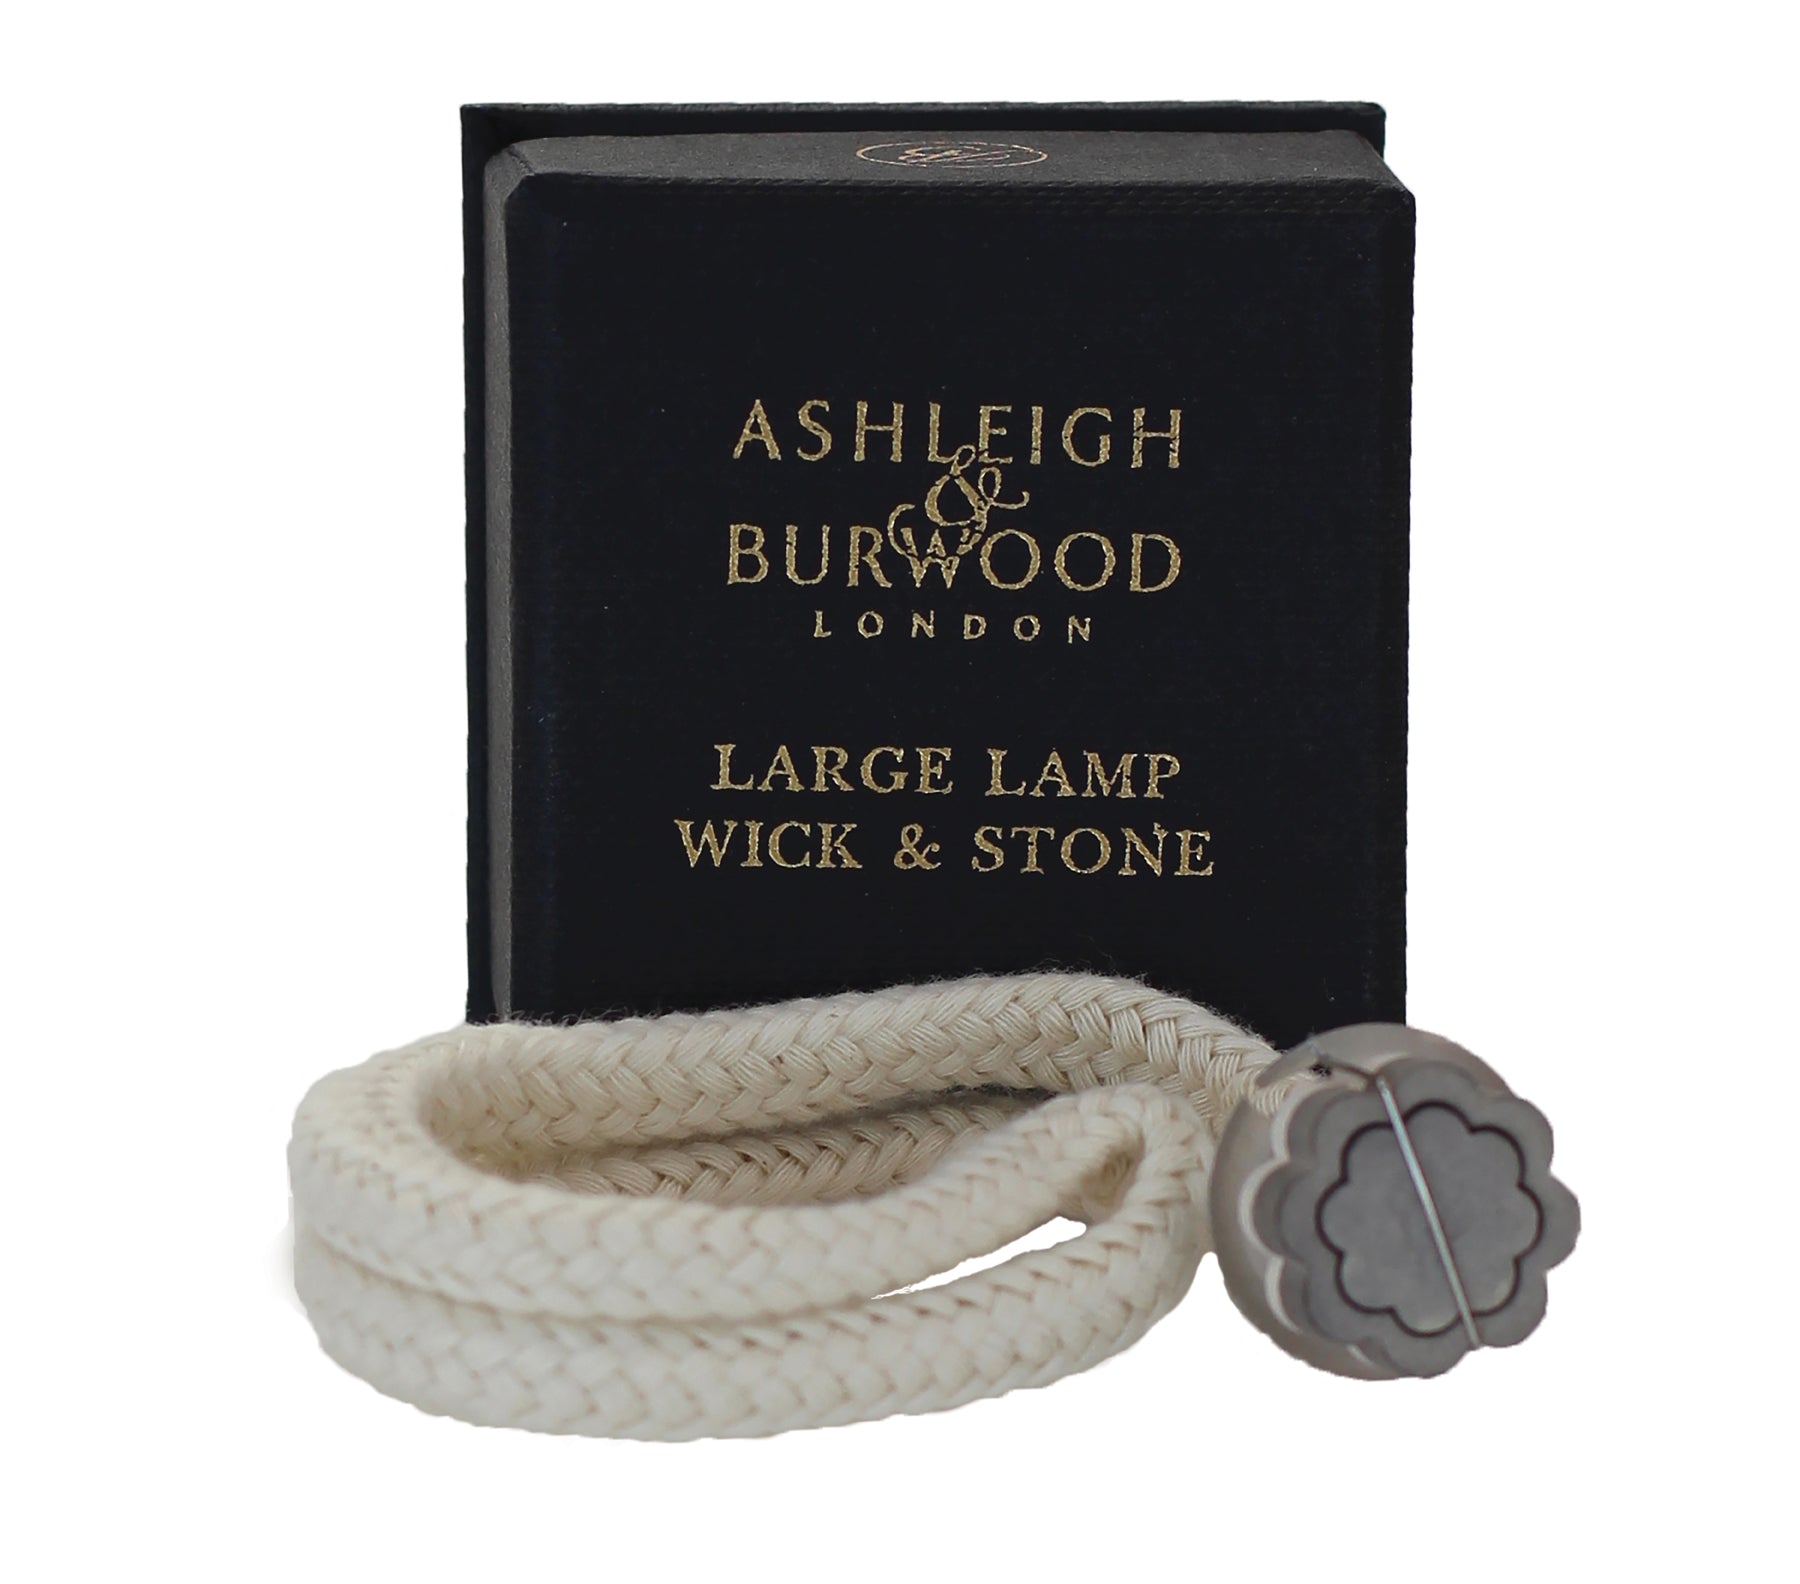 A gift boxed replacement wick and stone for Ashleigh and Burwood large fragrance lamps